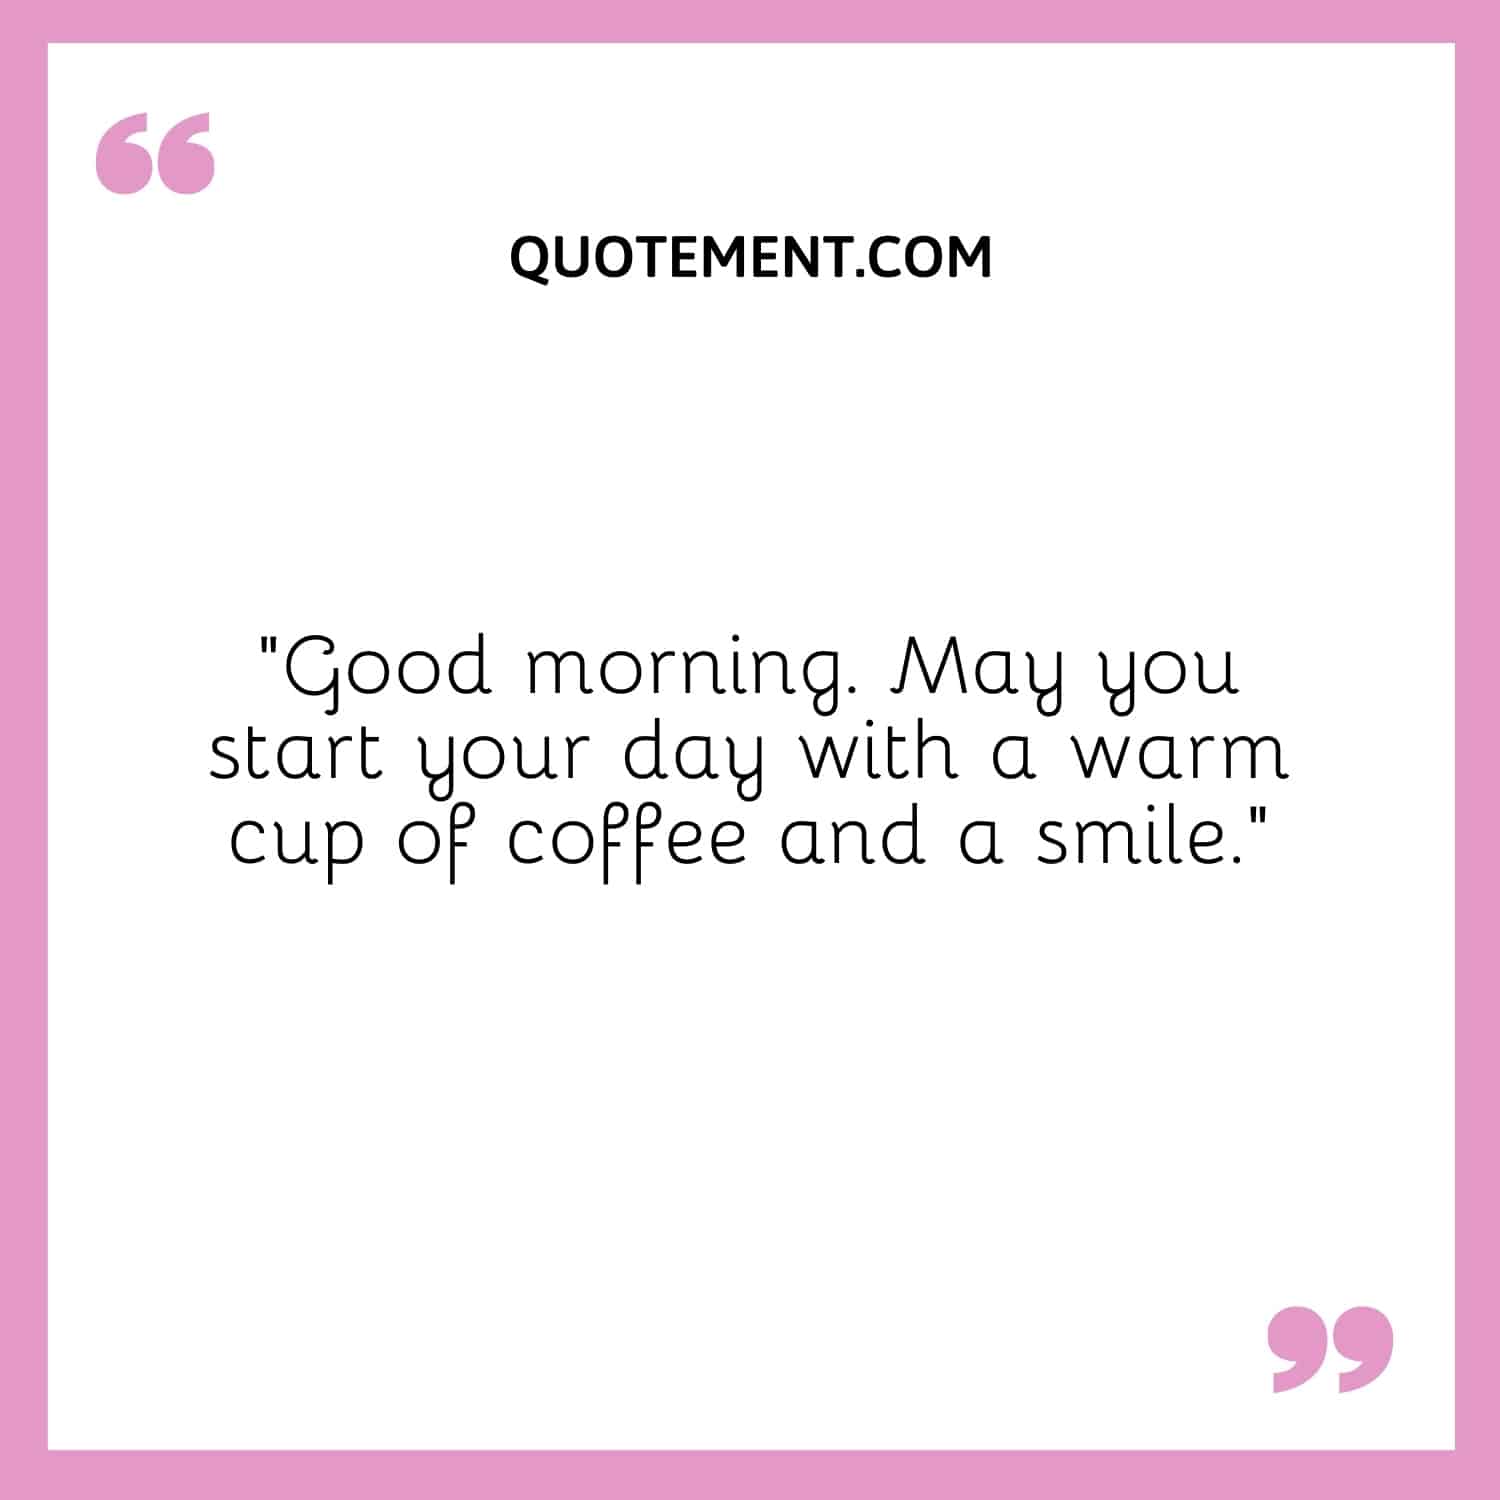 May you start your day with a warm cup of coffee and a smile